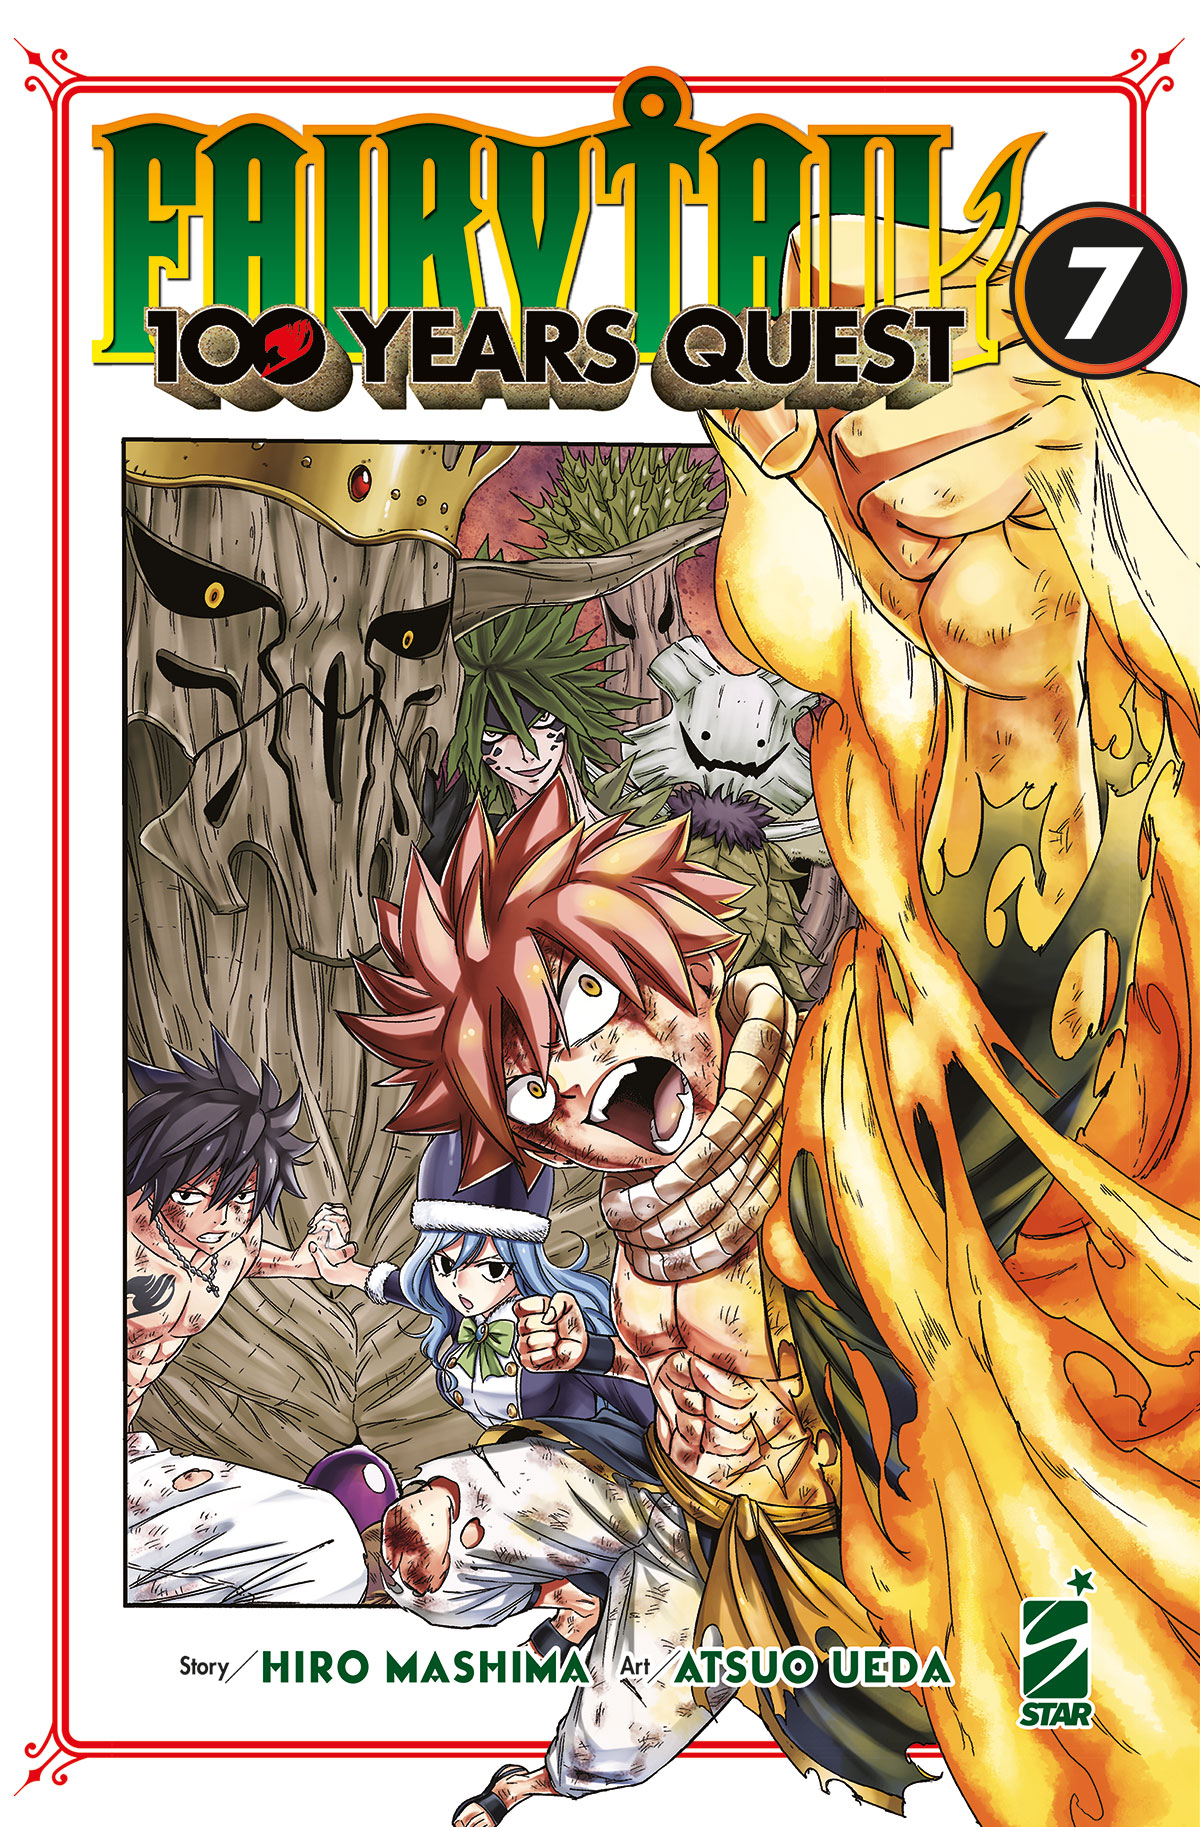 YOUNG #322 FAIRY TAIL 100 YEARS QUEST N.07